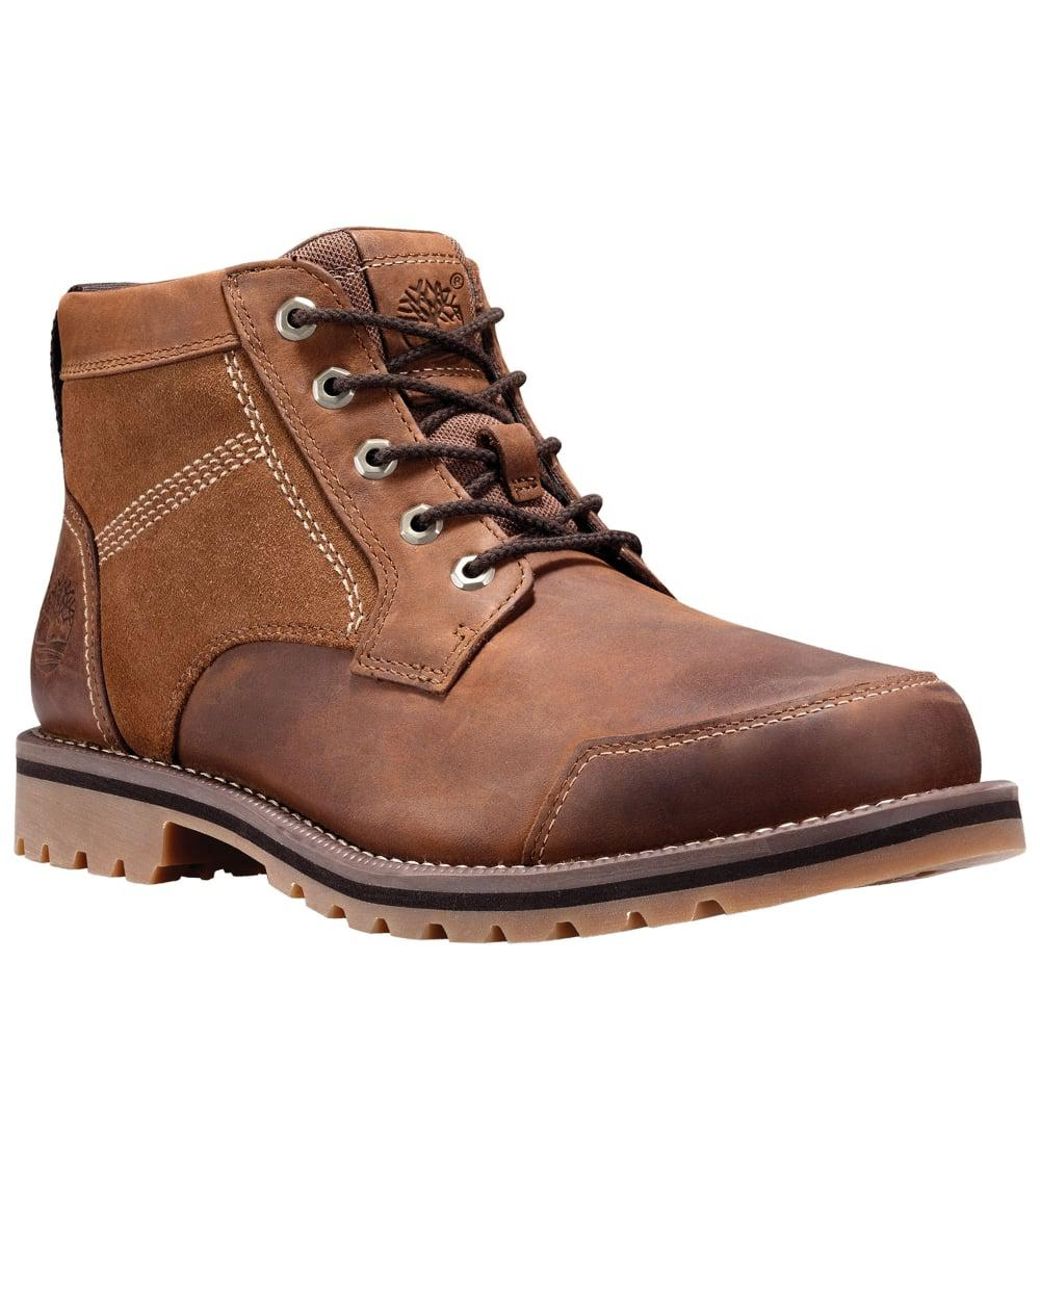 Lyst - Timberland Larchmont Chukka Mens Casual Boots in Brown for Men